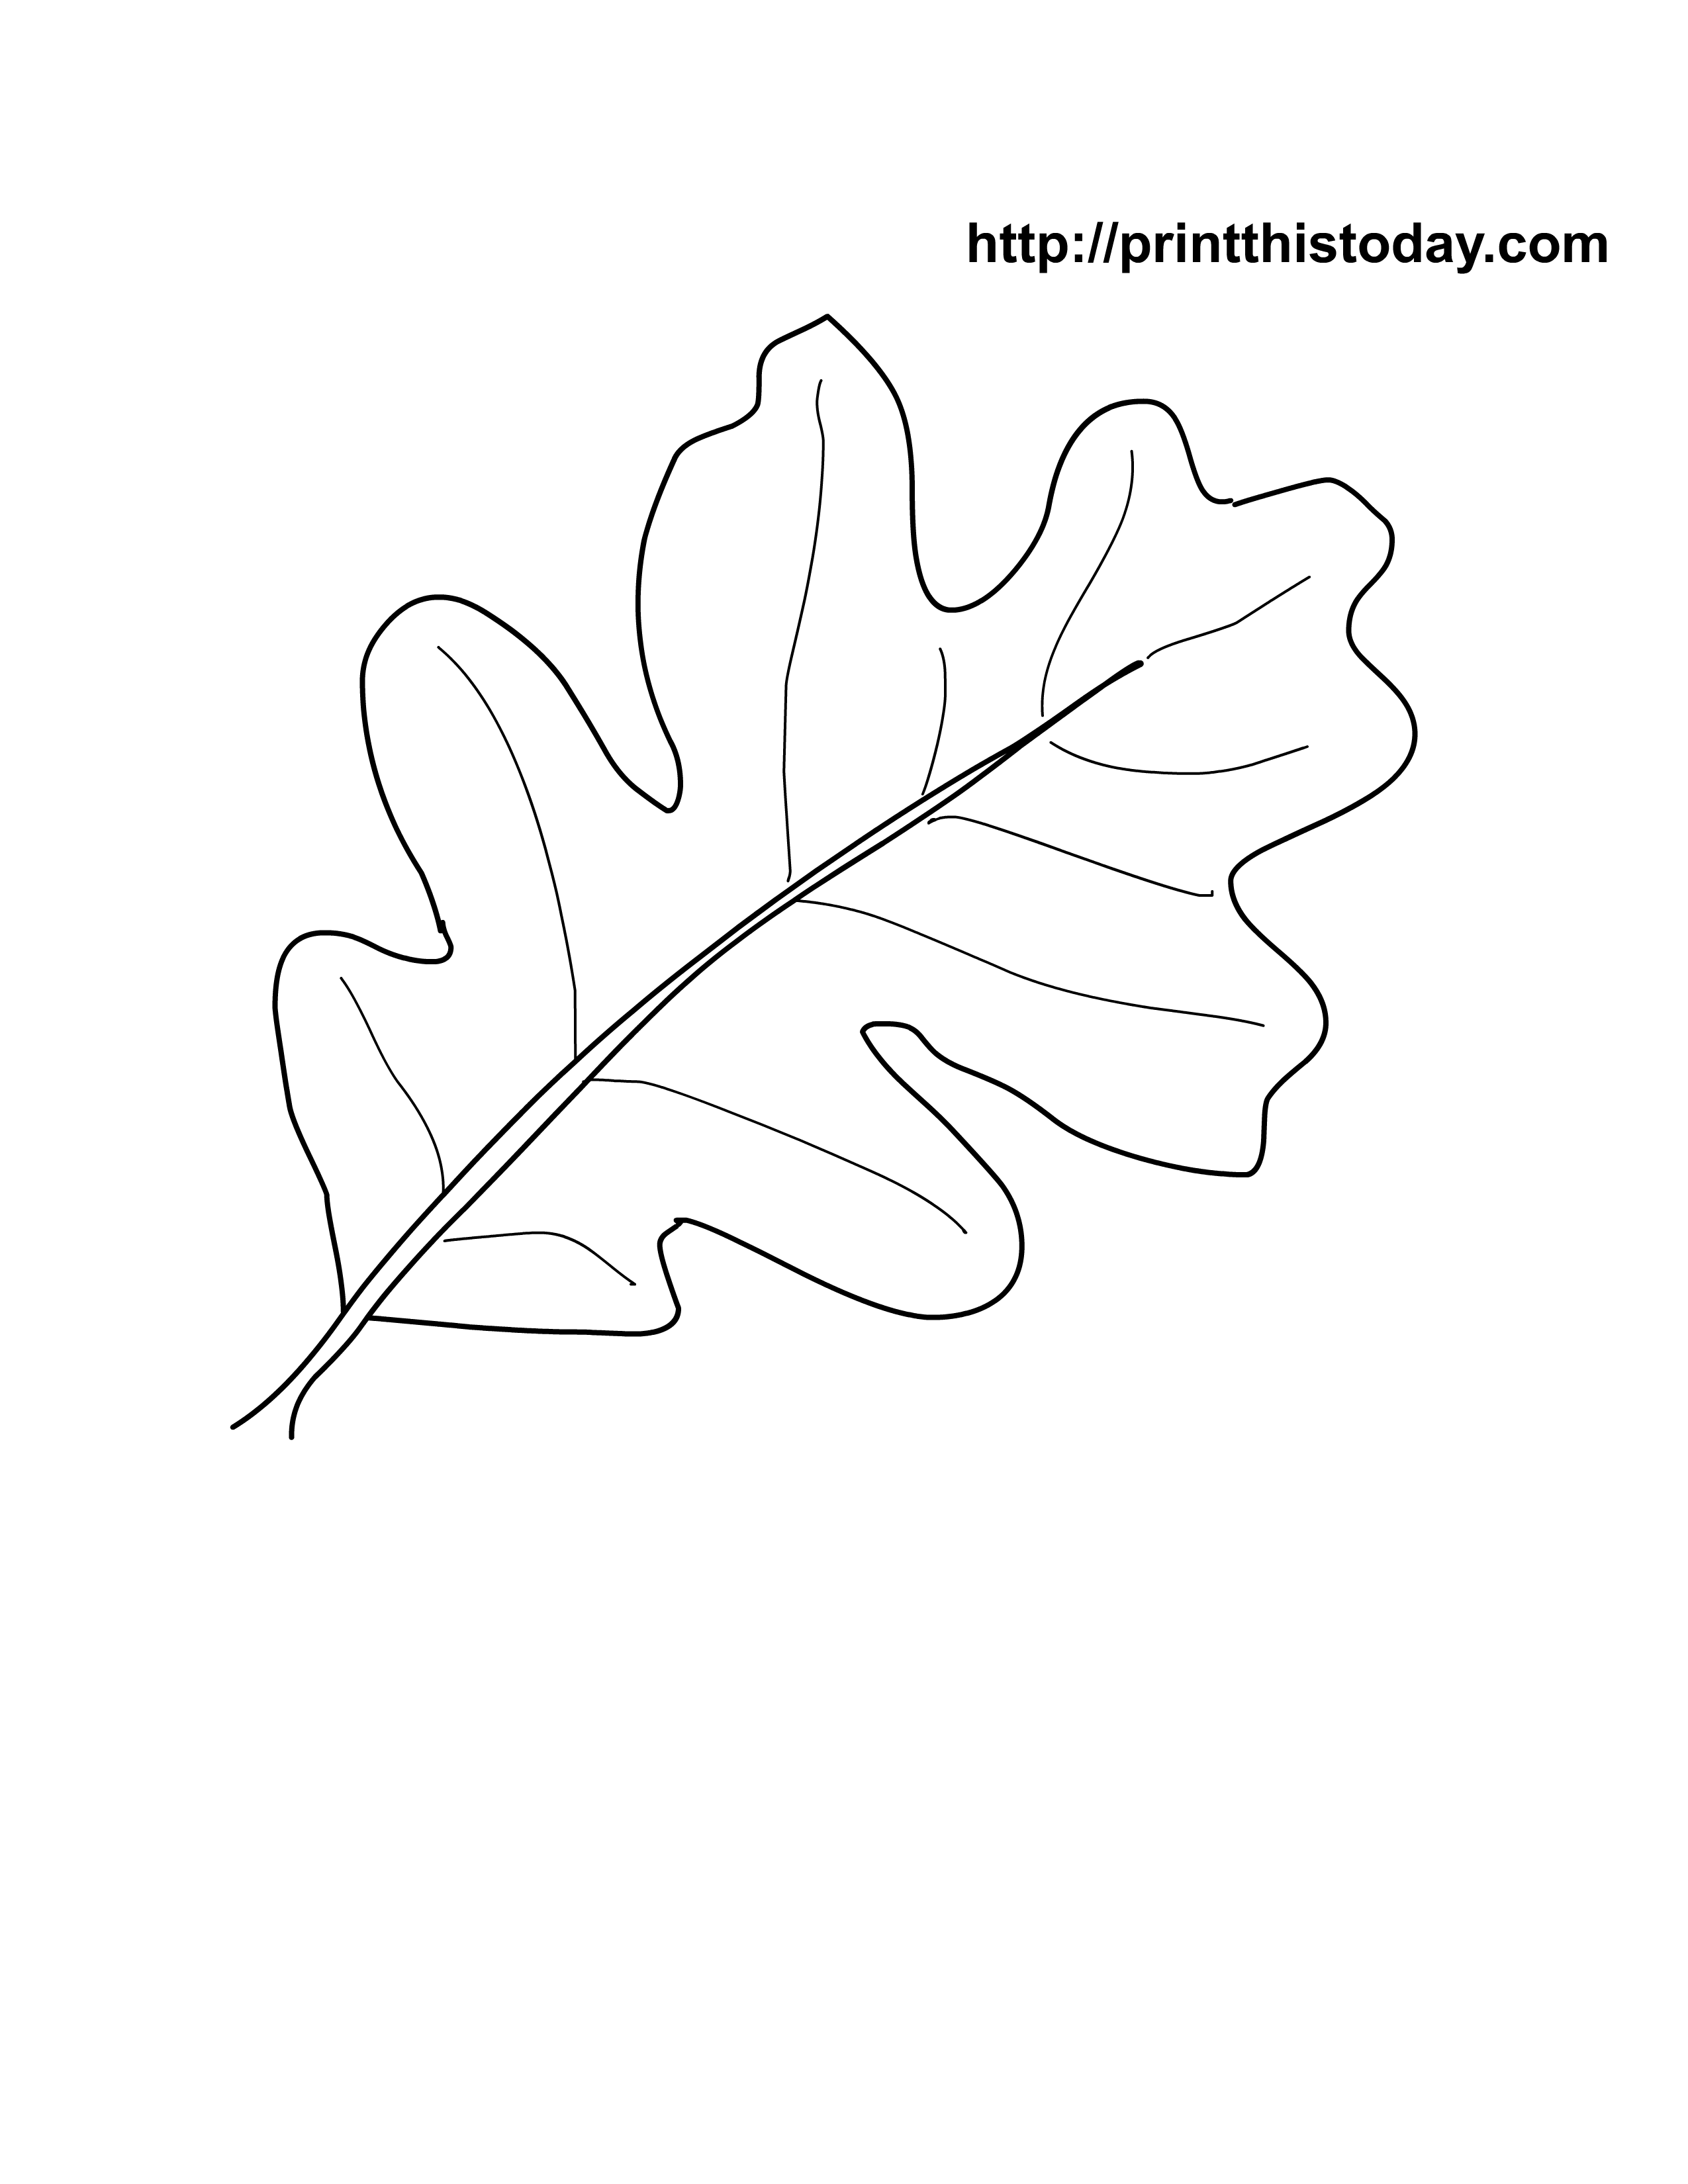 Free Printable Autumn, Fall Coloring Pages